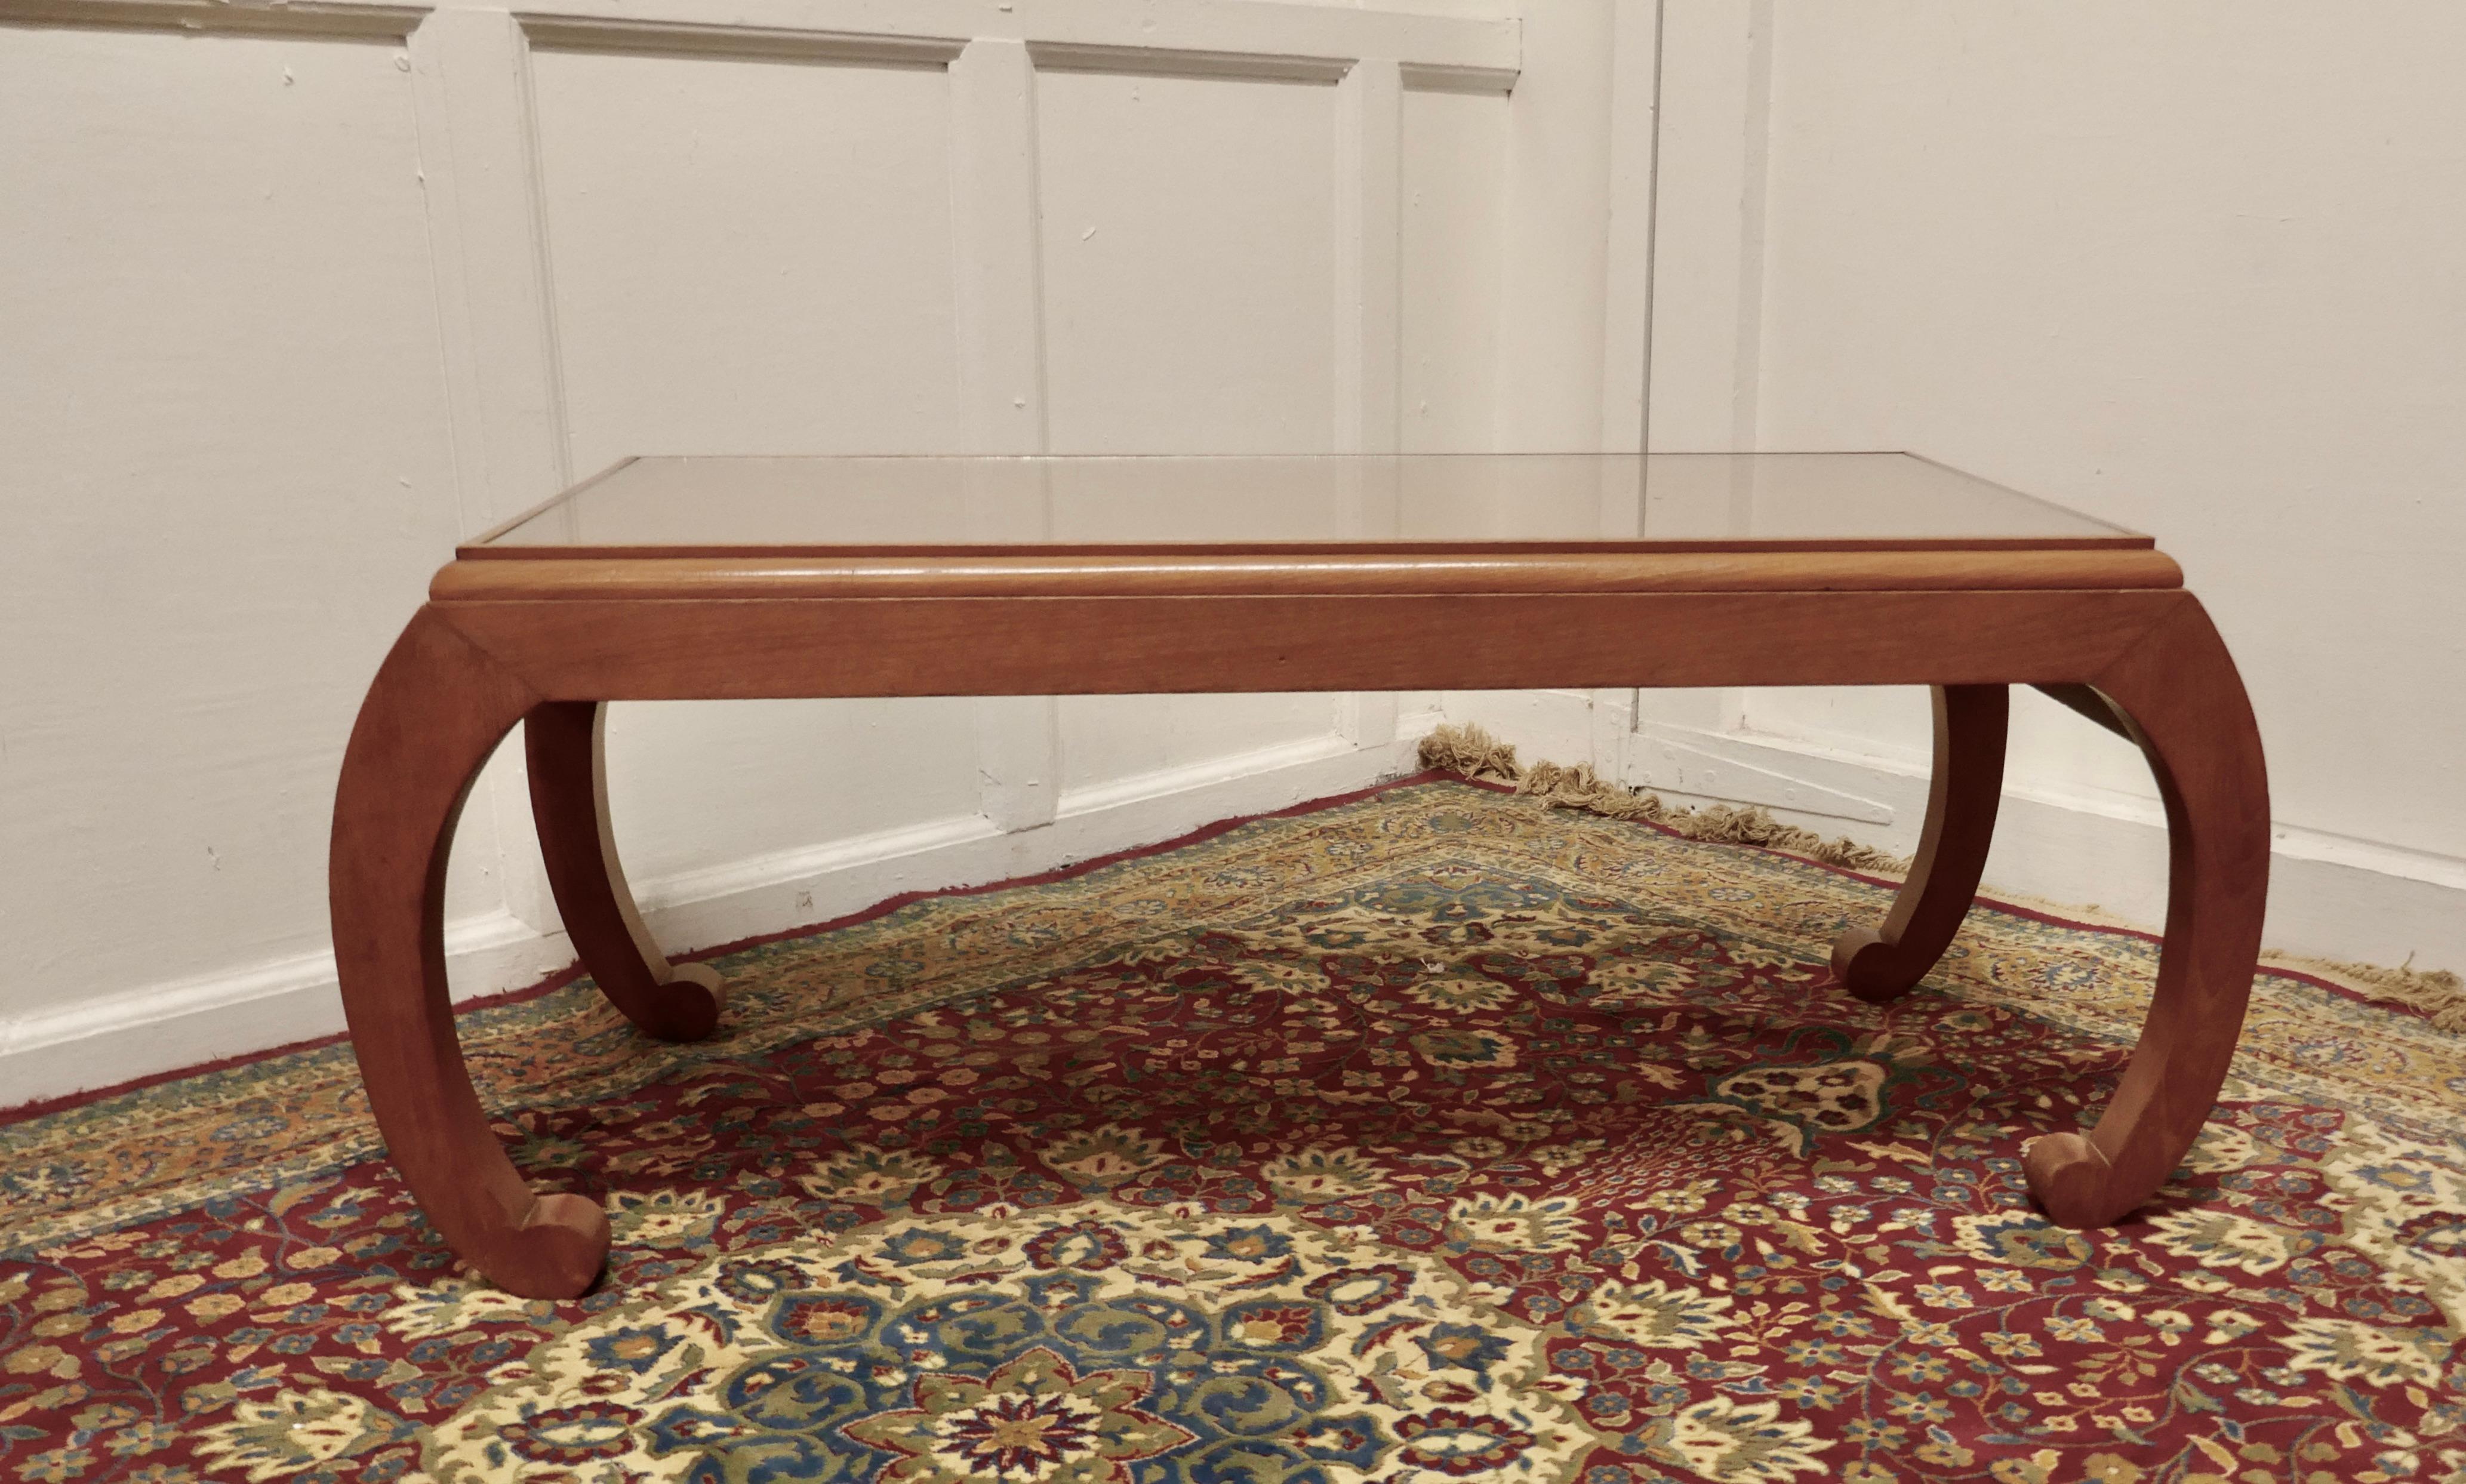 Oriental Satin walnut low table, coffee table

This is a very attractive piece, the table is in the style of an opium table, it has a carved border beneath the plate glass top
The table has an inset plate glass top which protects the the top when